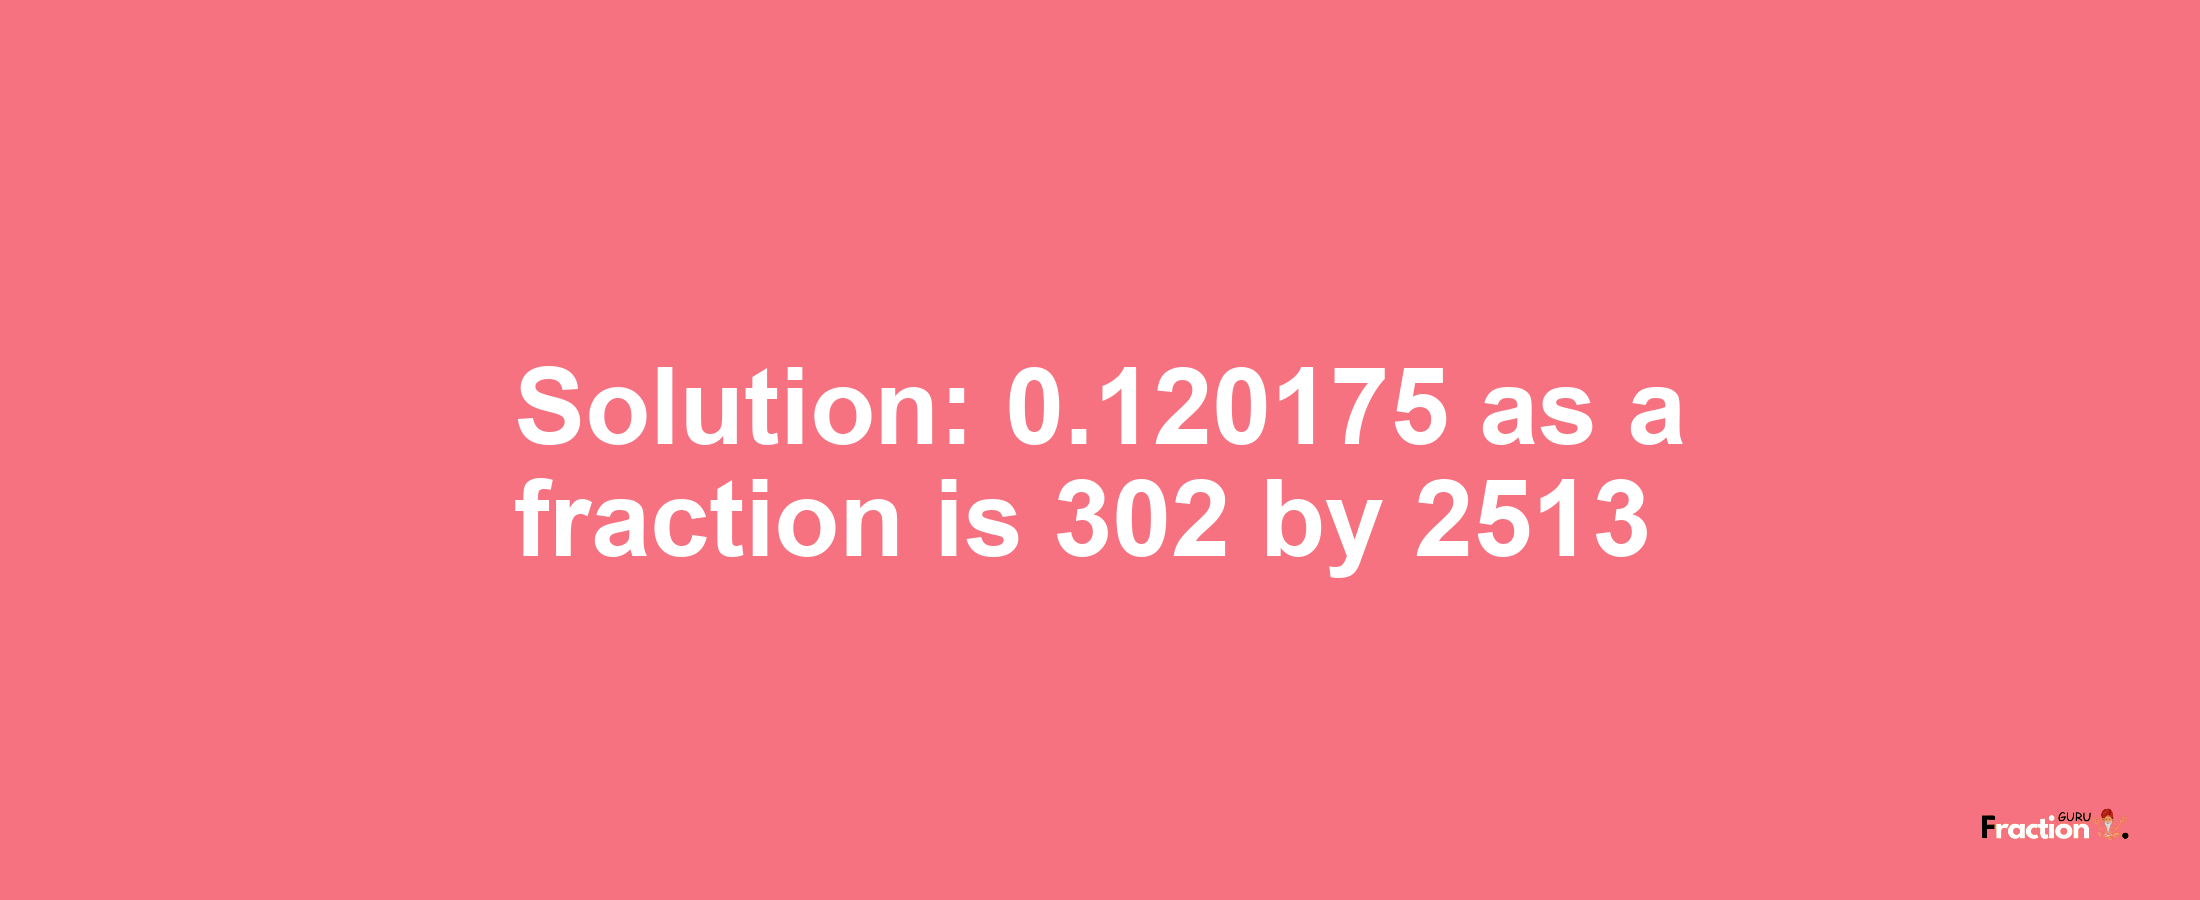 Solution:0.120175 as a fraction is 302/2513